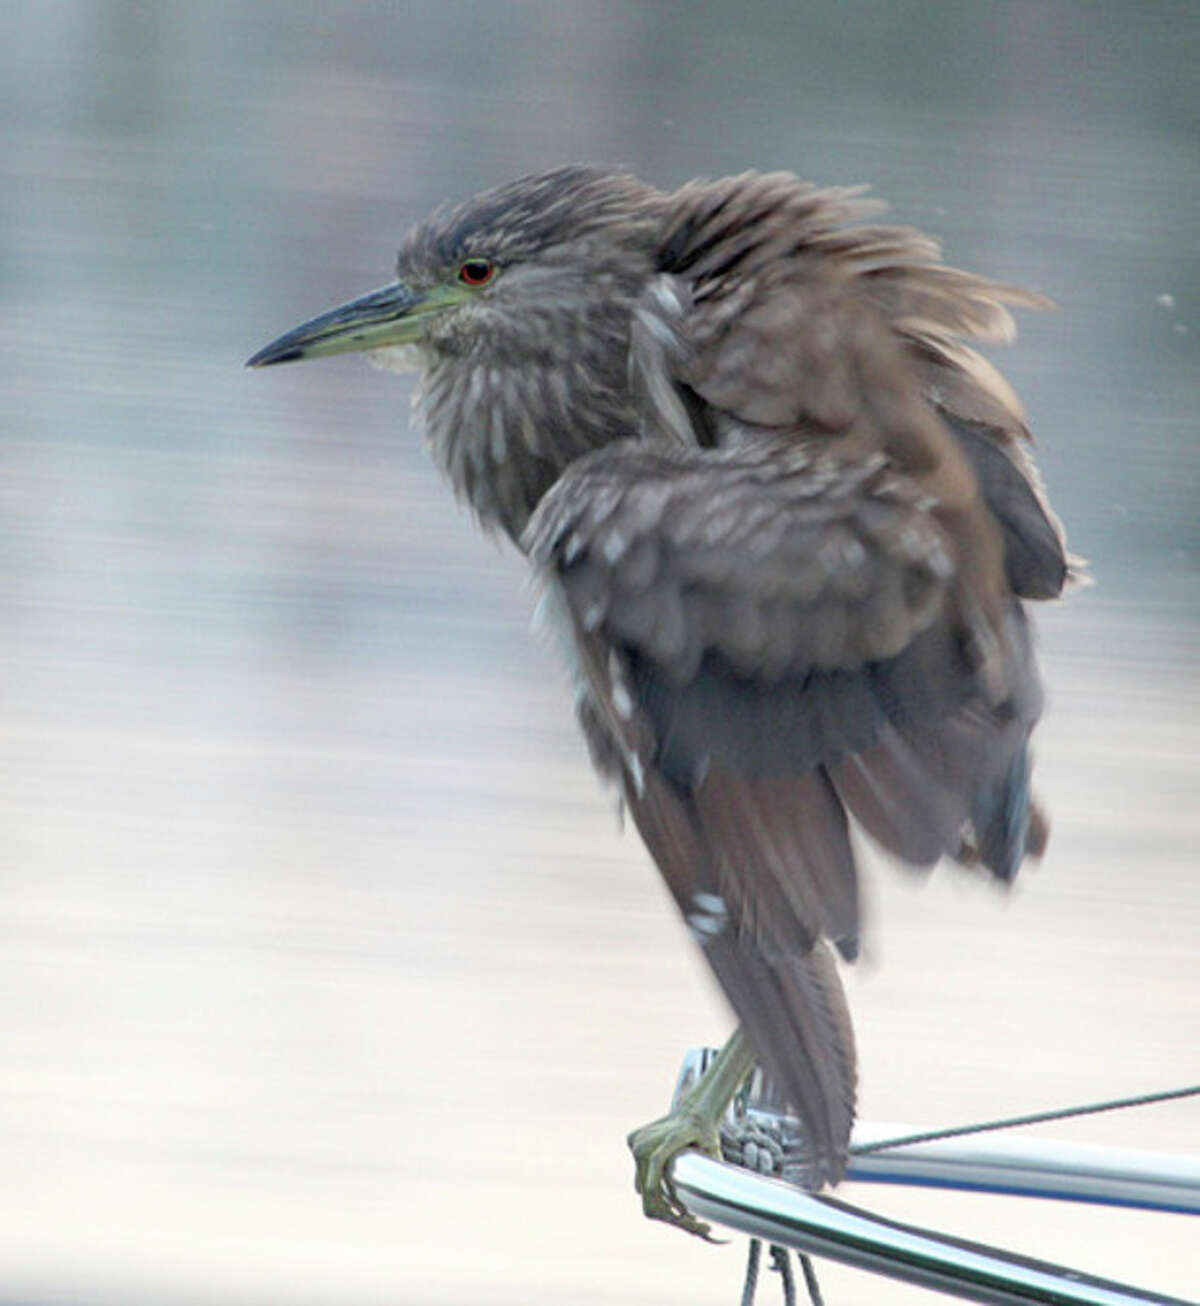 Photo by Chris Bosak A Black-crowned Night Heron sits on the railing of a boat along the Norwalk River this summer.